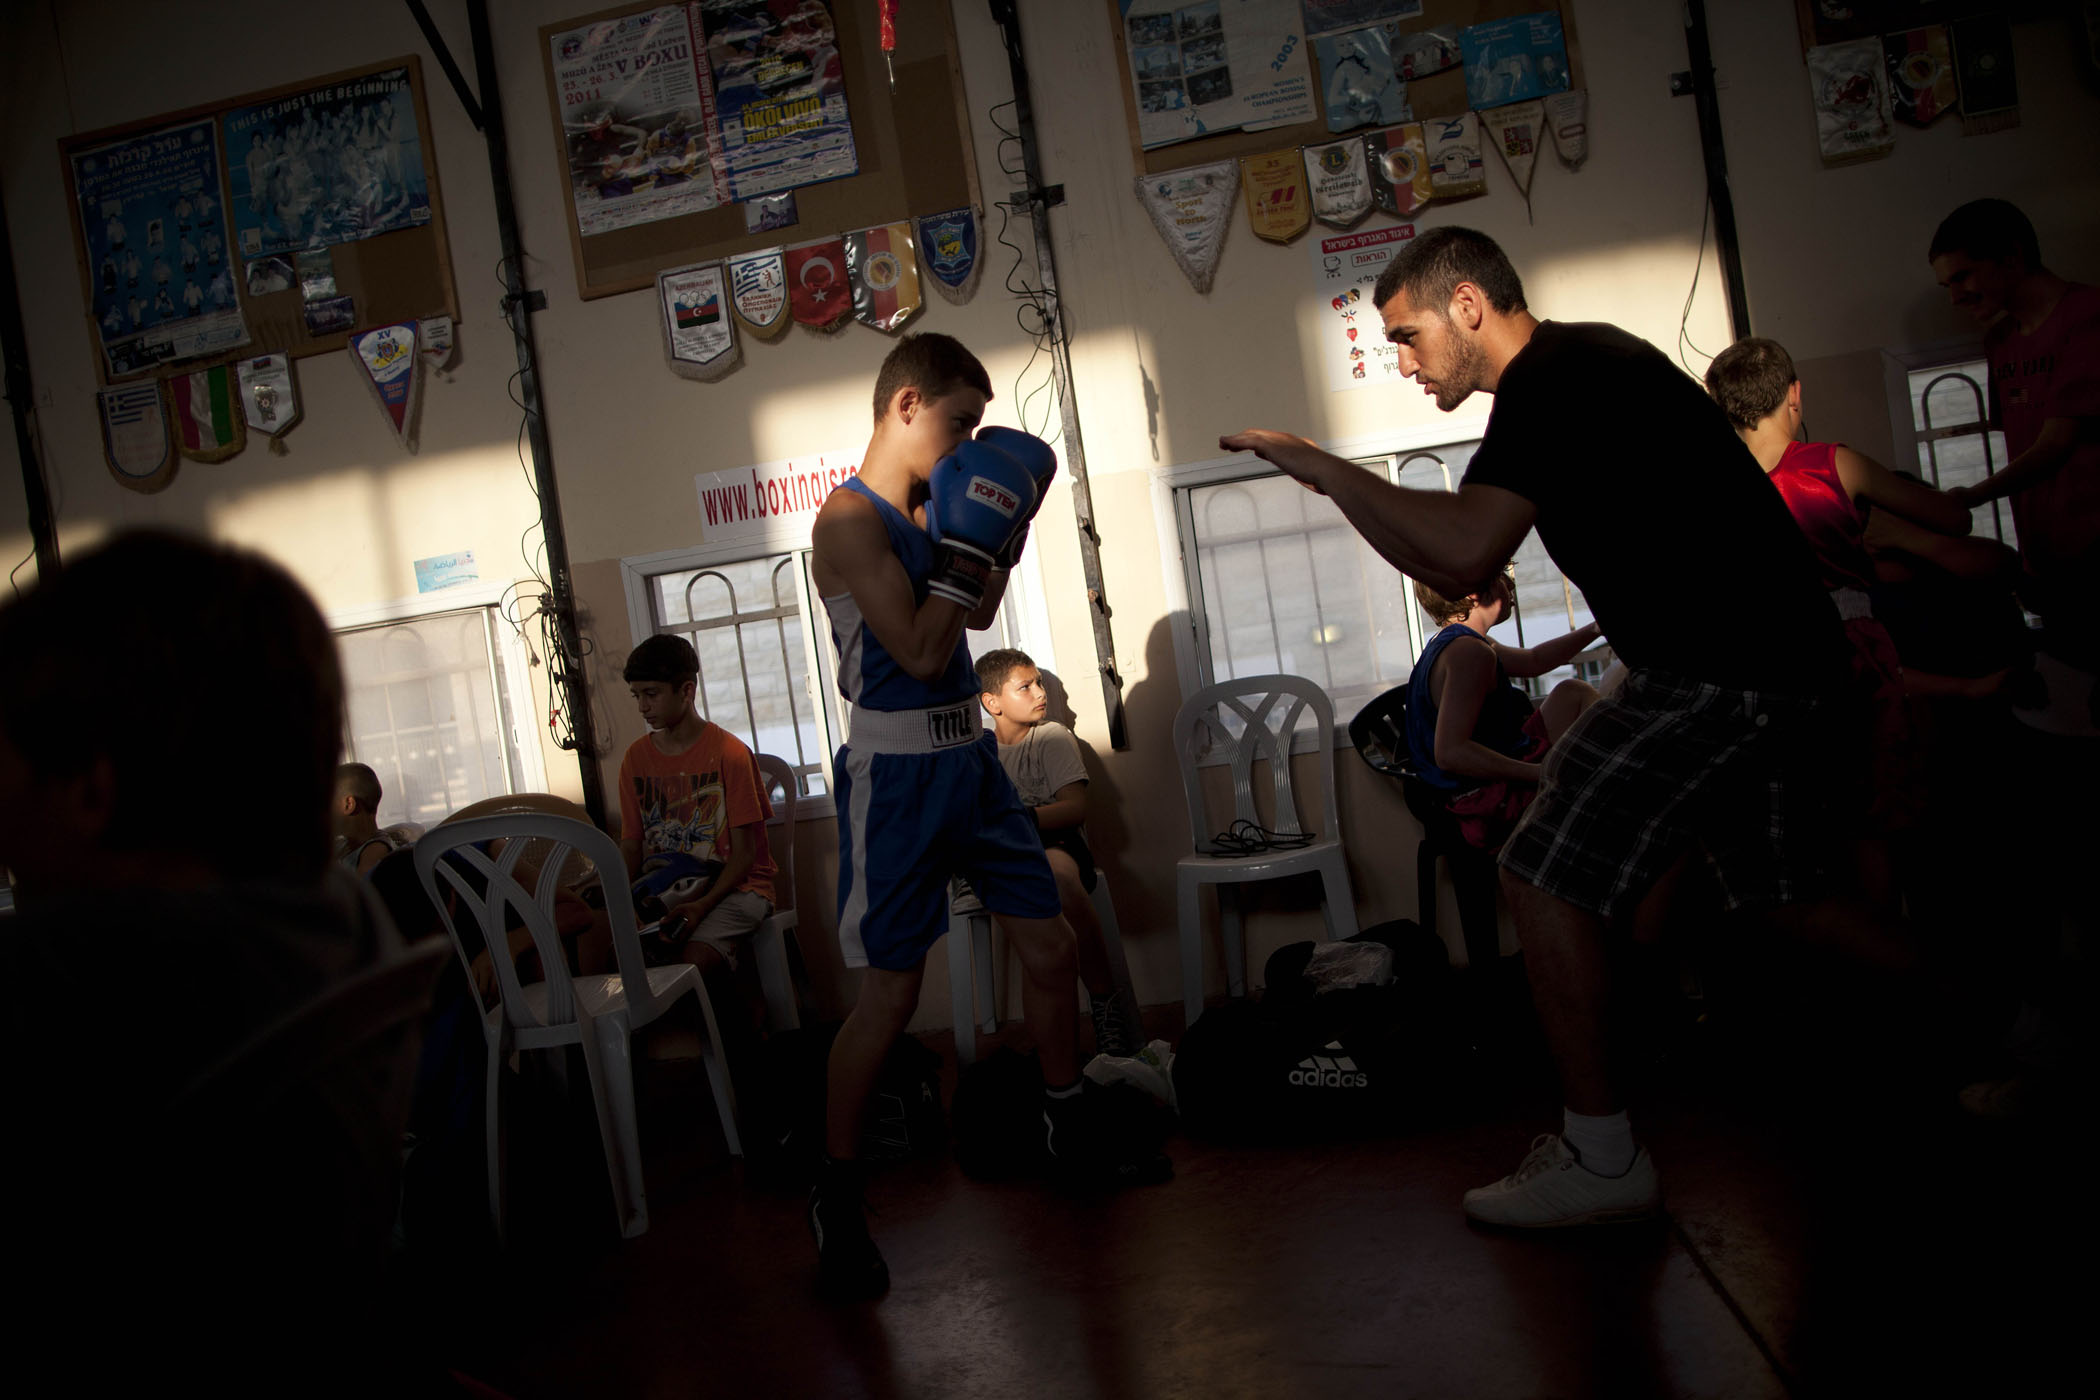 Israeli boys warm up before a fight during Israel's National Youth Boxing Championship in the Arab village of Kfar Yasif, northern Israel.